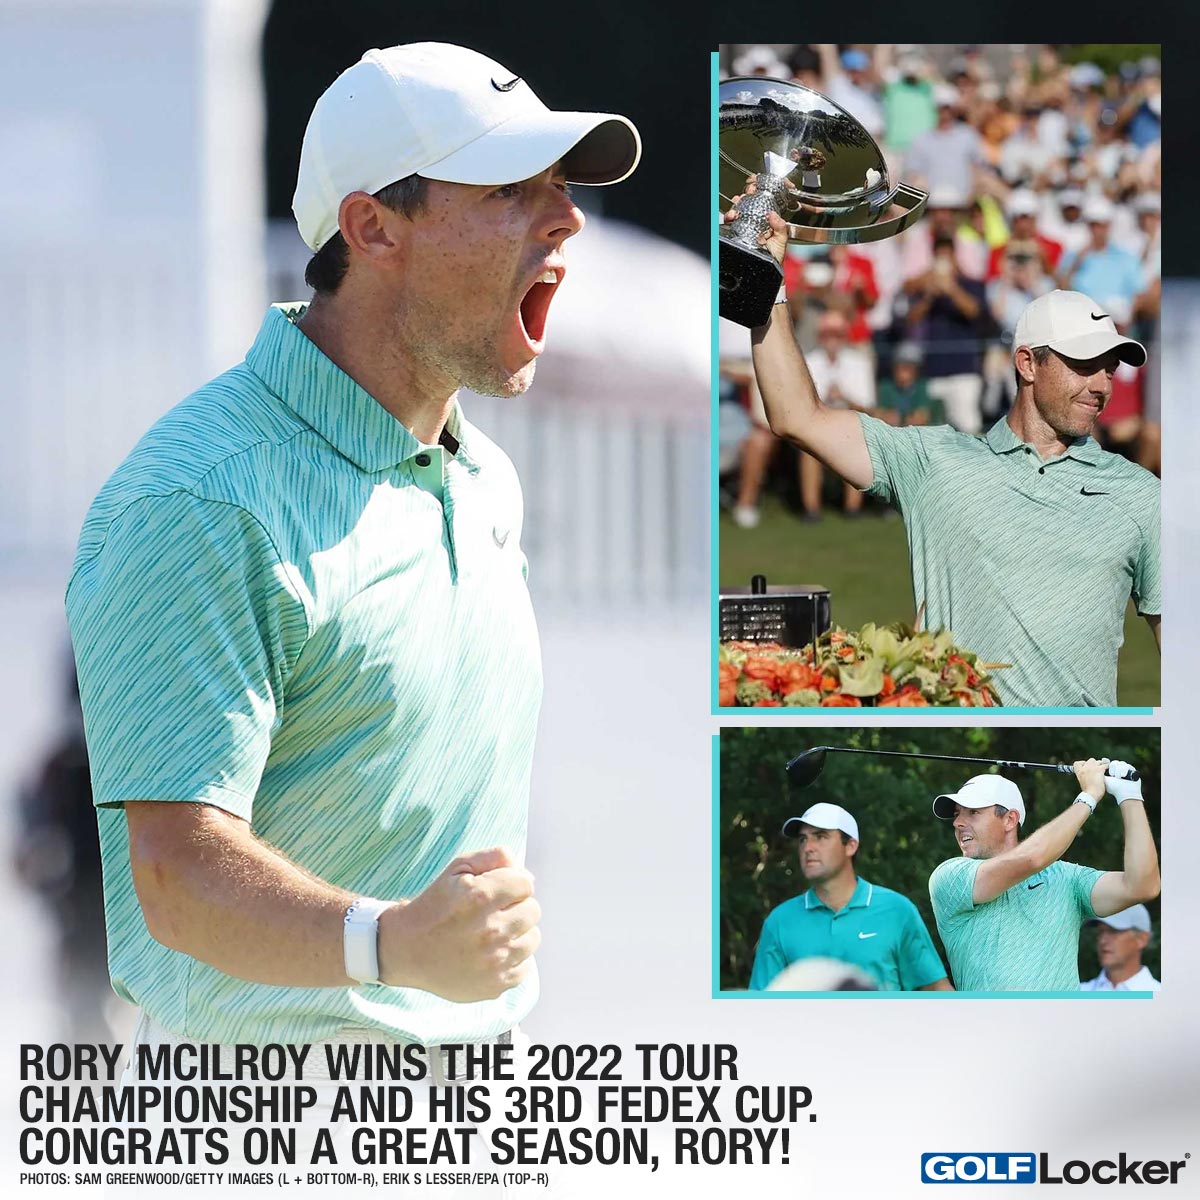 Rory McIlroy Wins the 2022 Tour Chapionship and his 3rd FedEx Cup. Congrats on a great season, Rory!